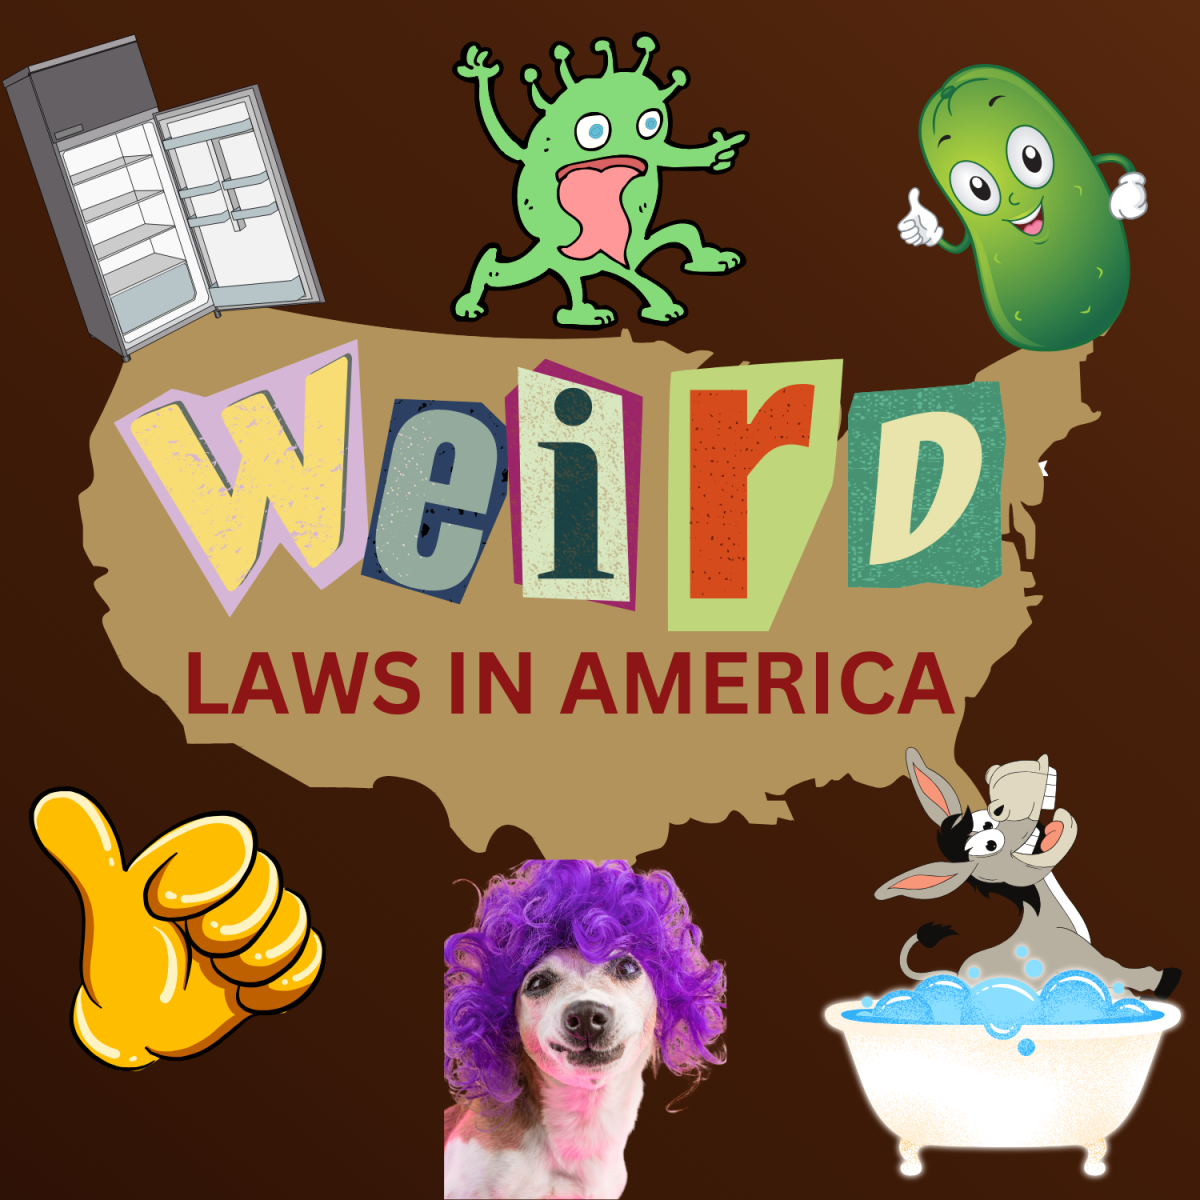 Weird Laws in America